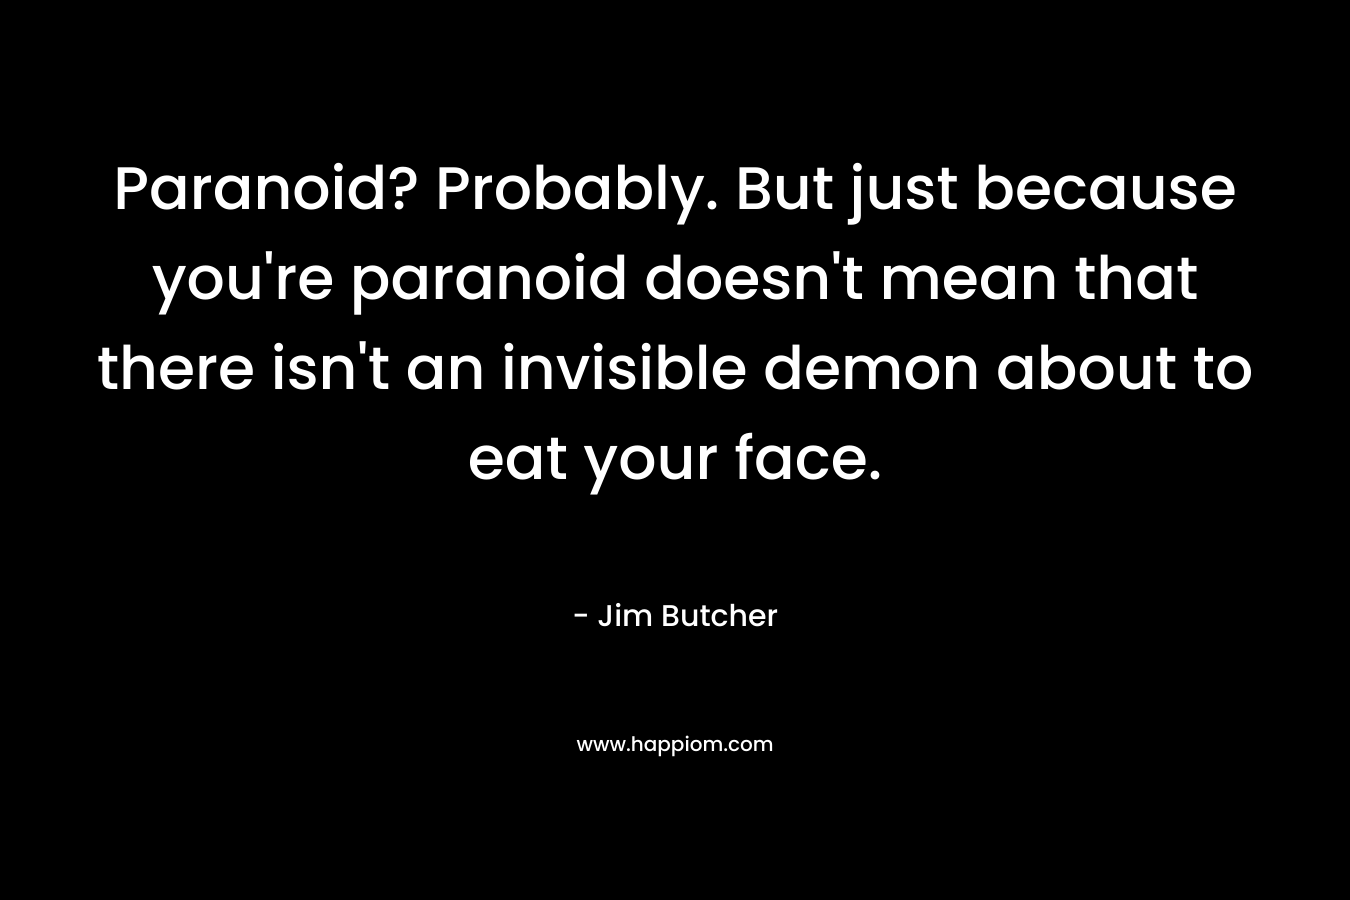 Paranoid? Probably. But just because you’re paranoid doesn’t mean that there isn’t an invisible demon about to eat your face. – Jim Butcher